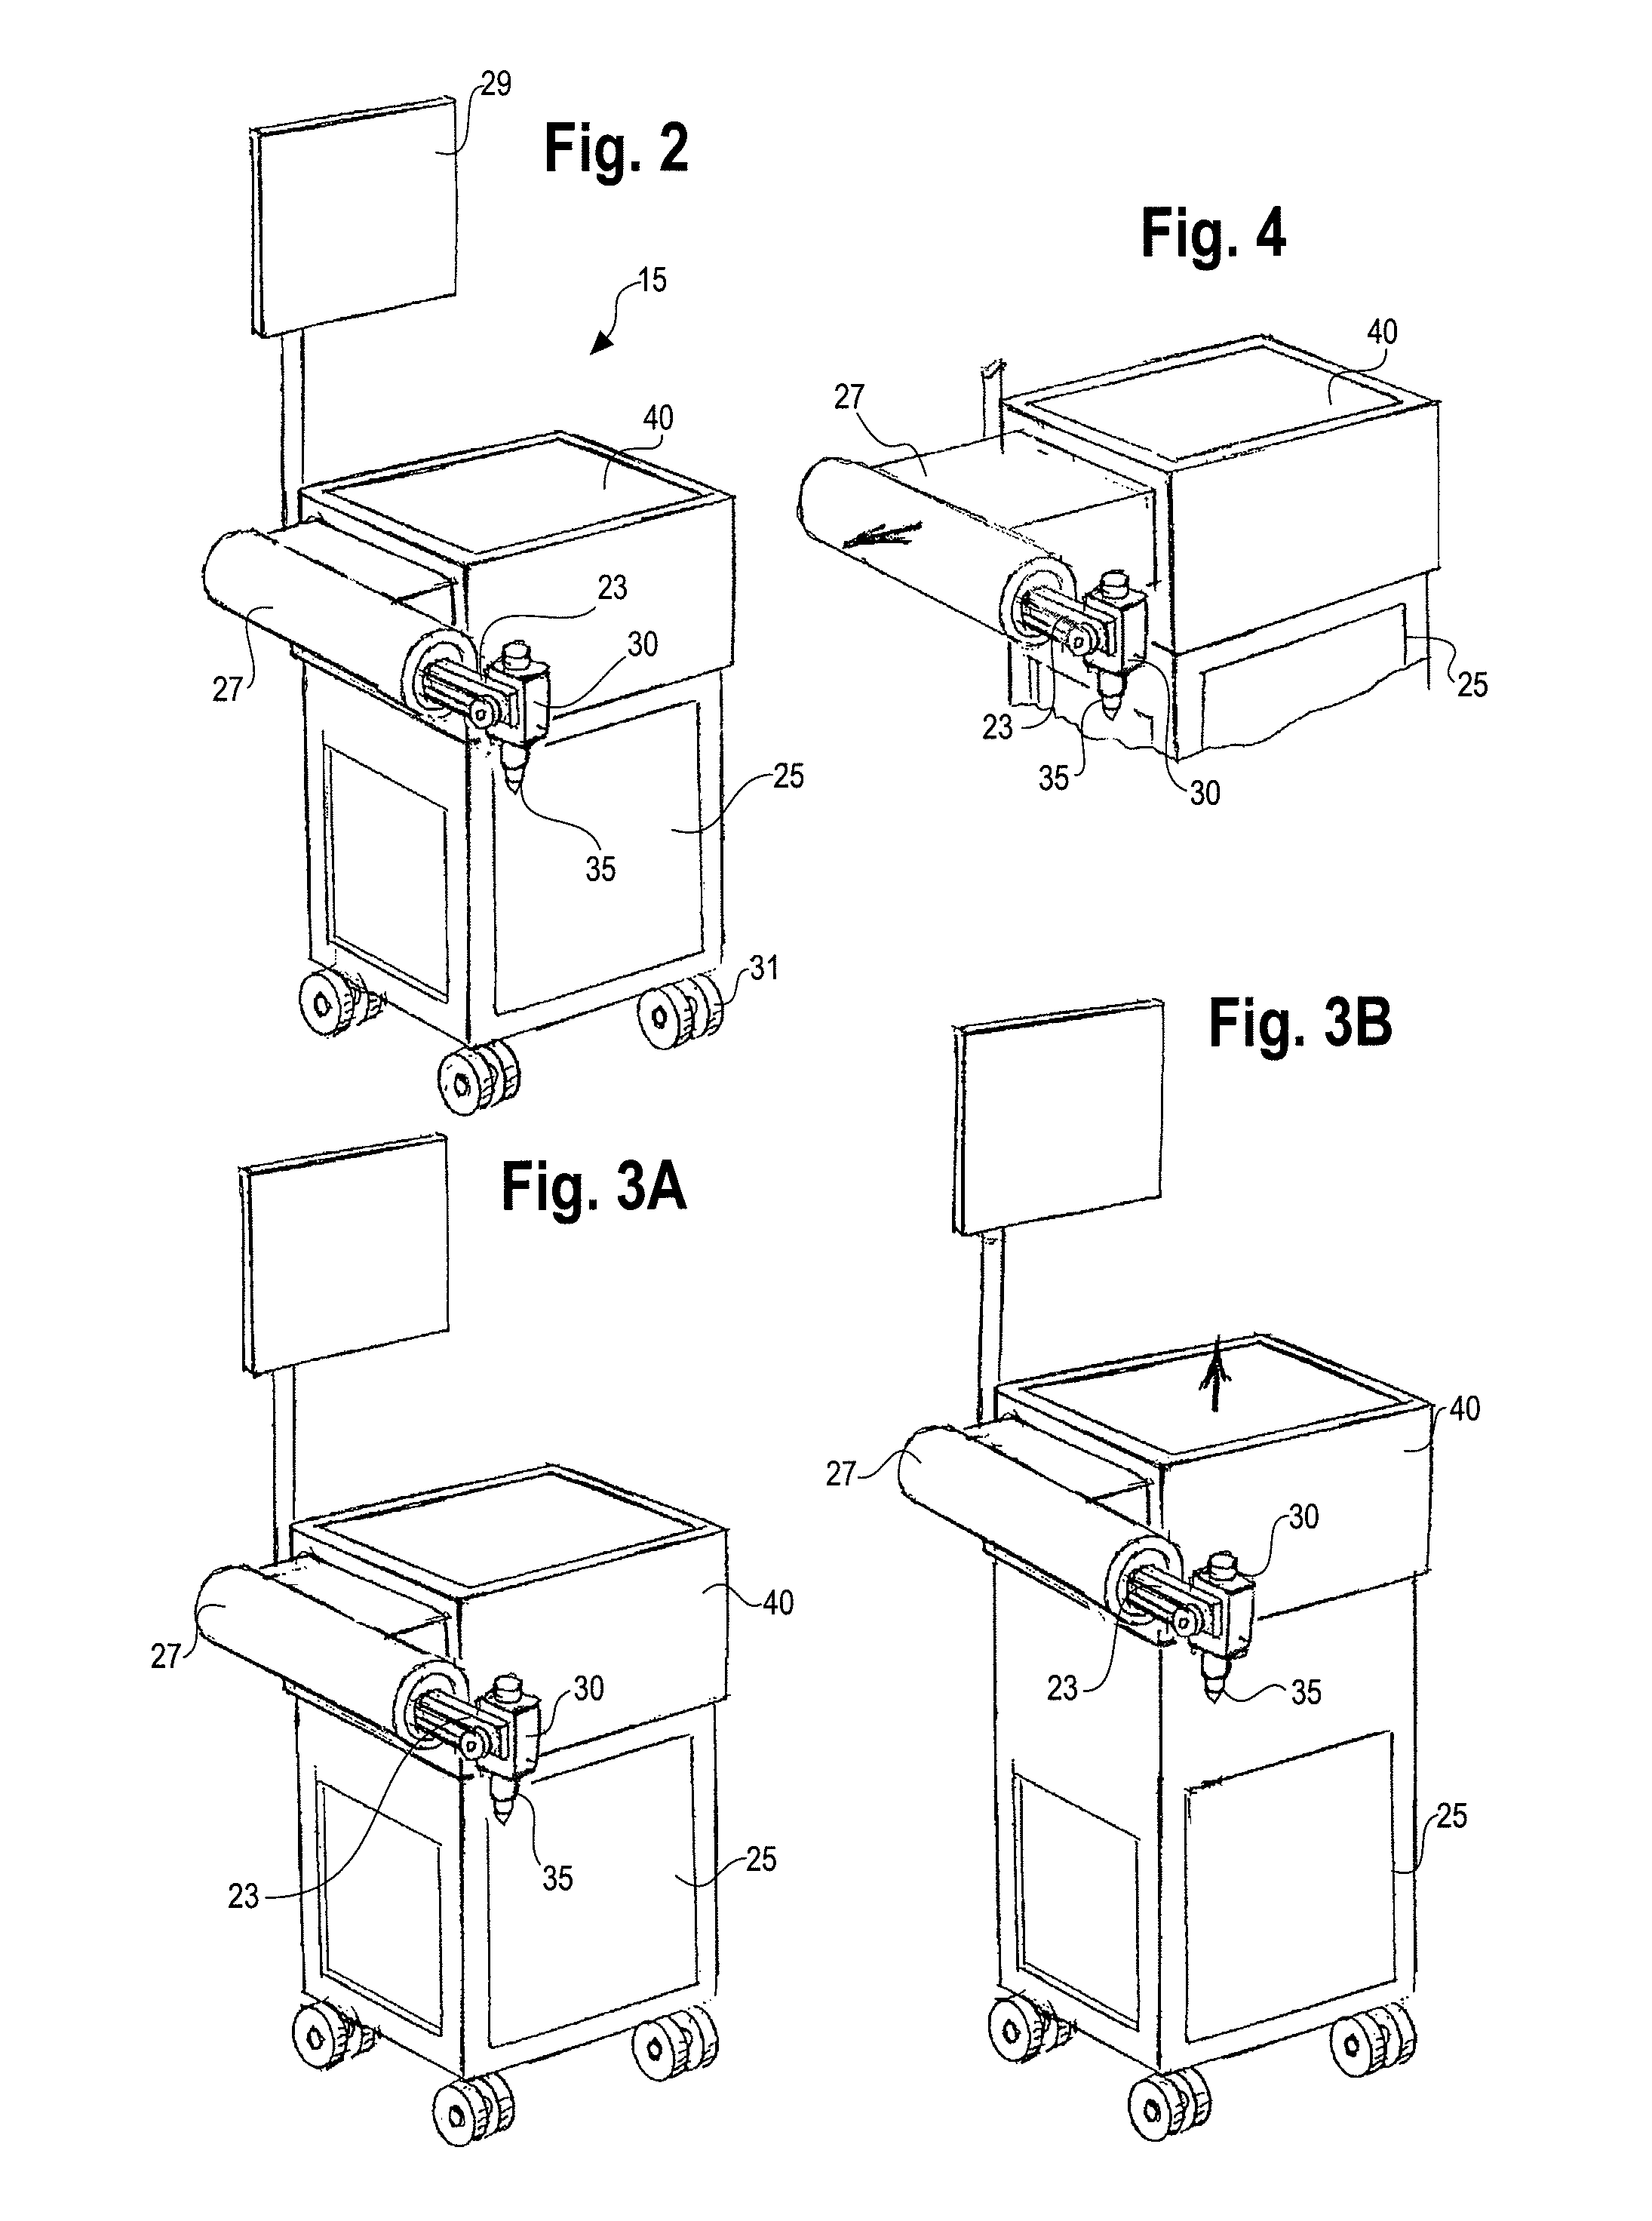 Method and system for performing invasive medical procedures using a surgical robot